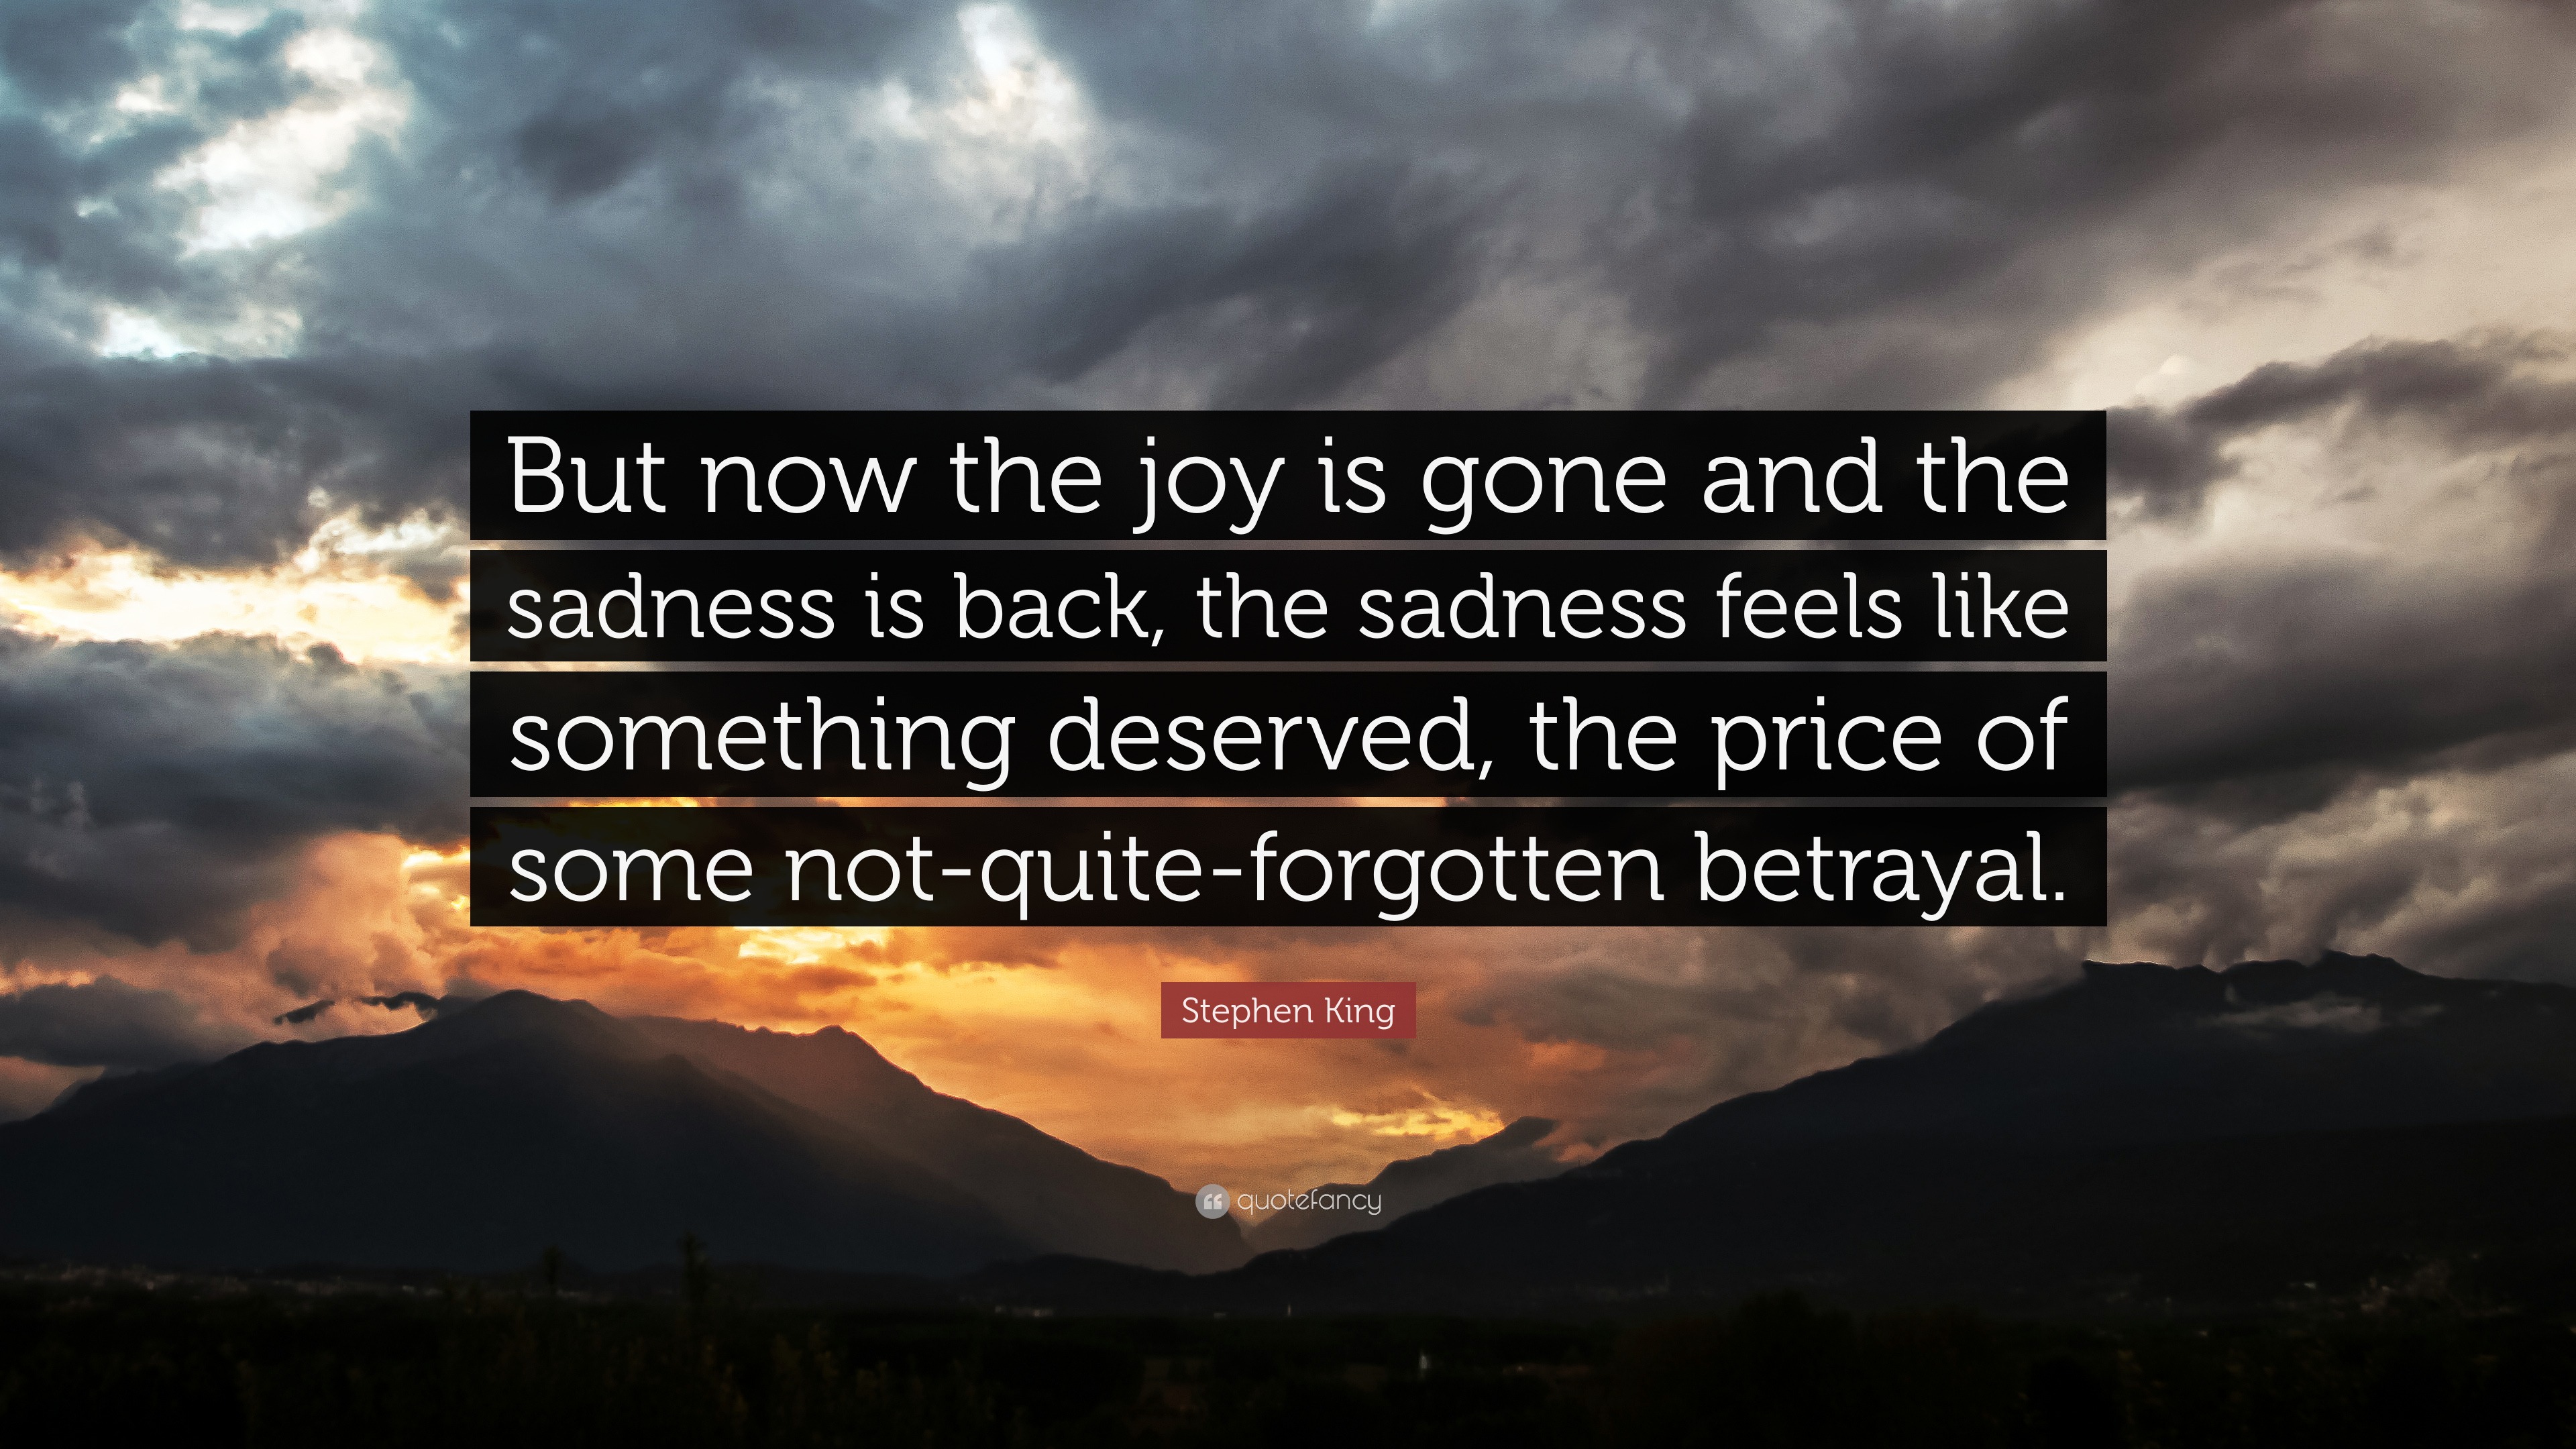 Stephen King Quote: “But now the joy is gone and the sadness is back, the  sadness feels like something deserved, the price of some not-quite-...”